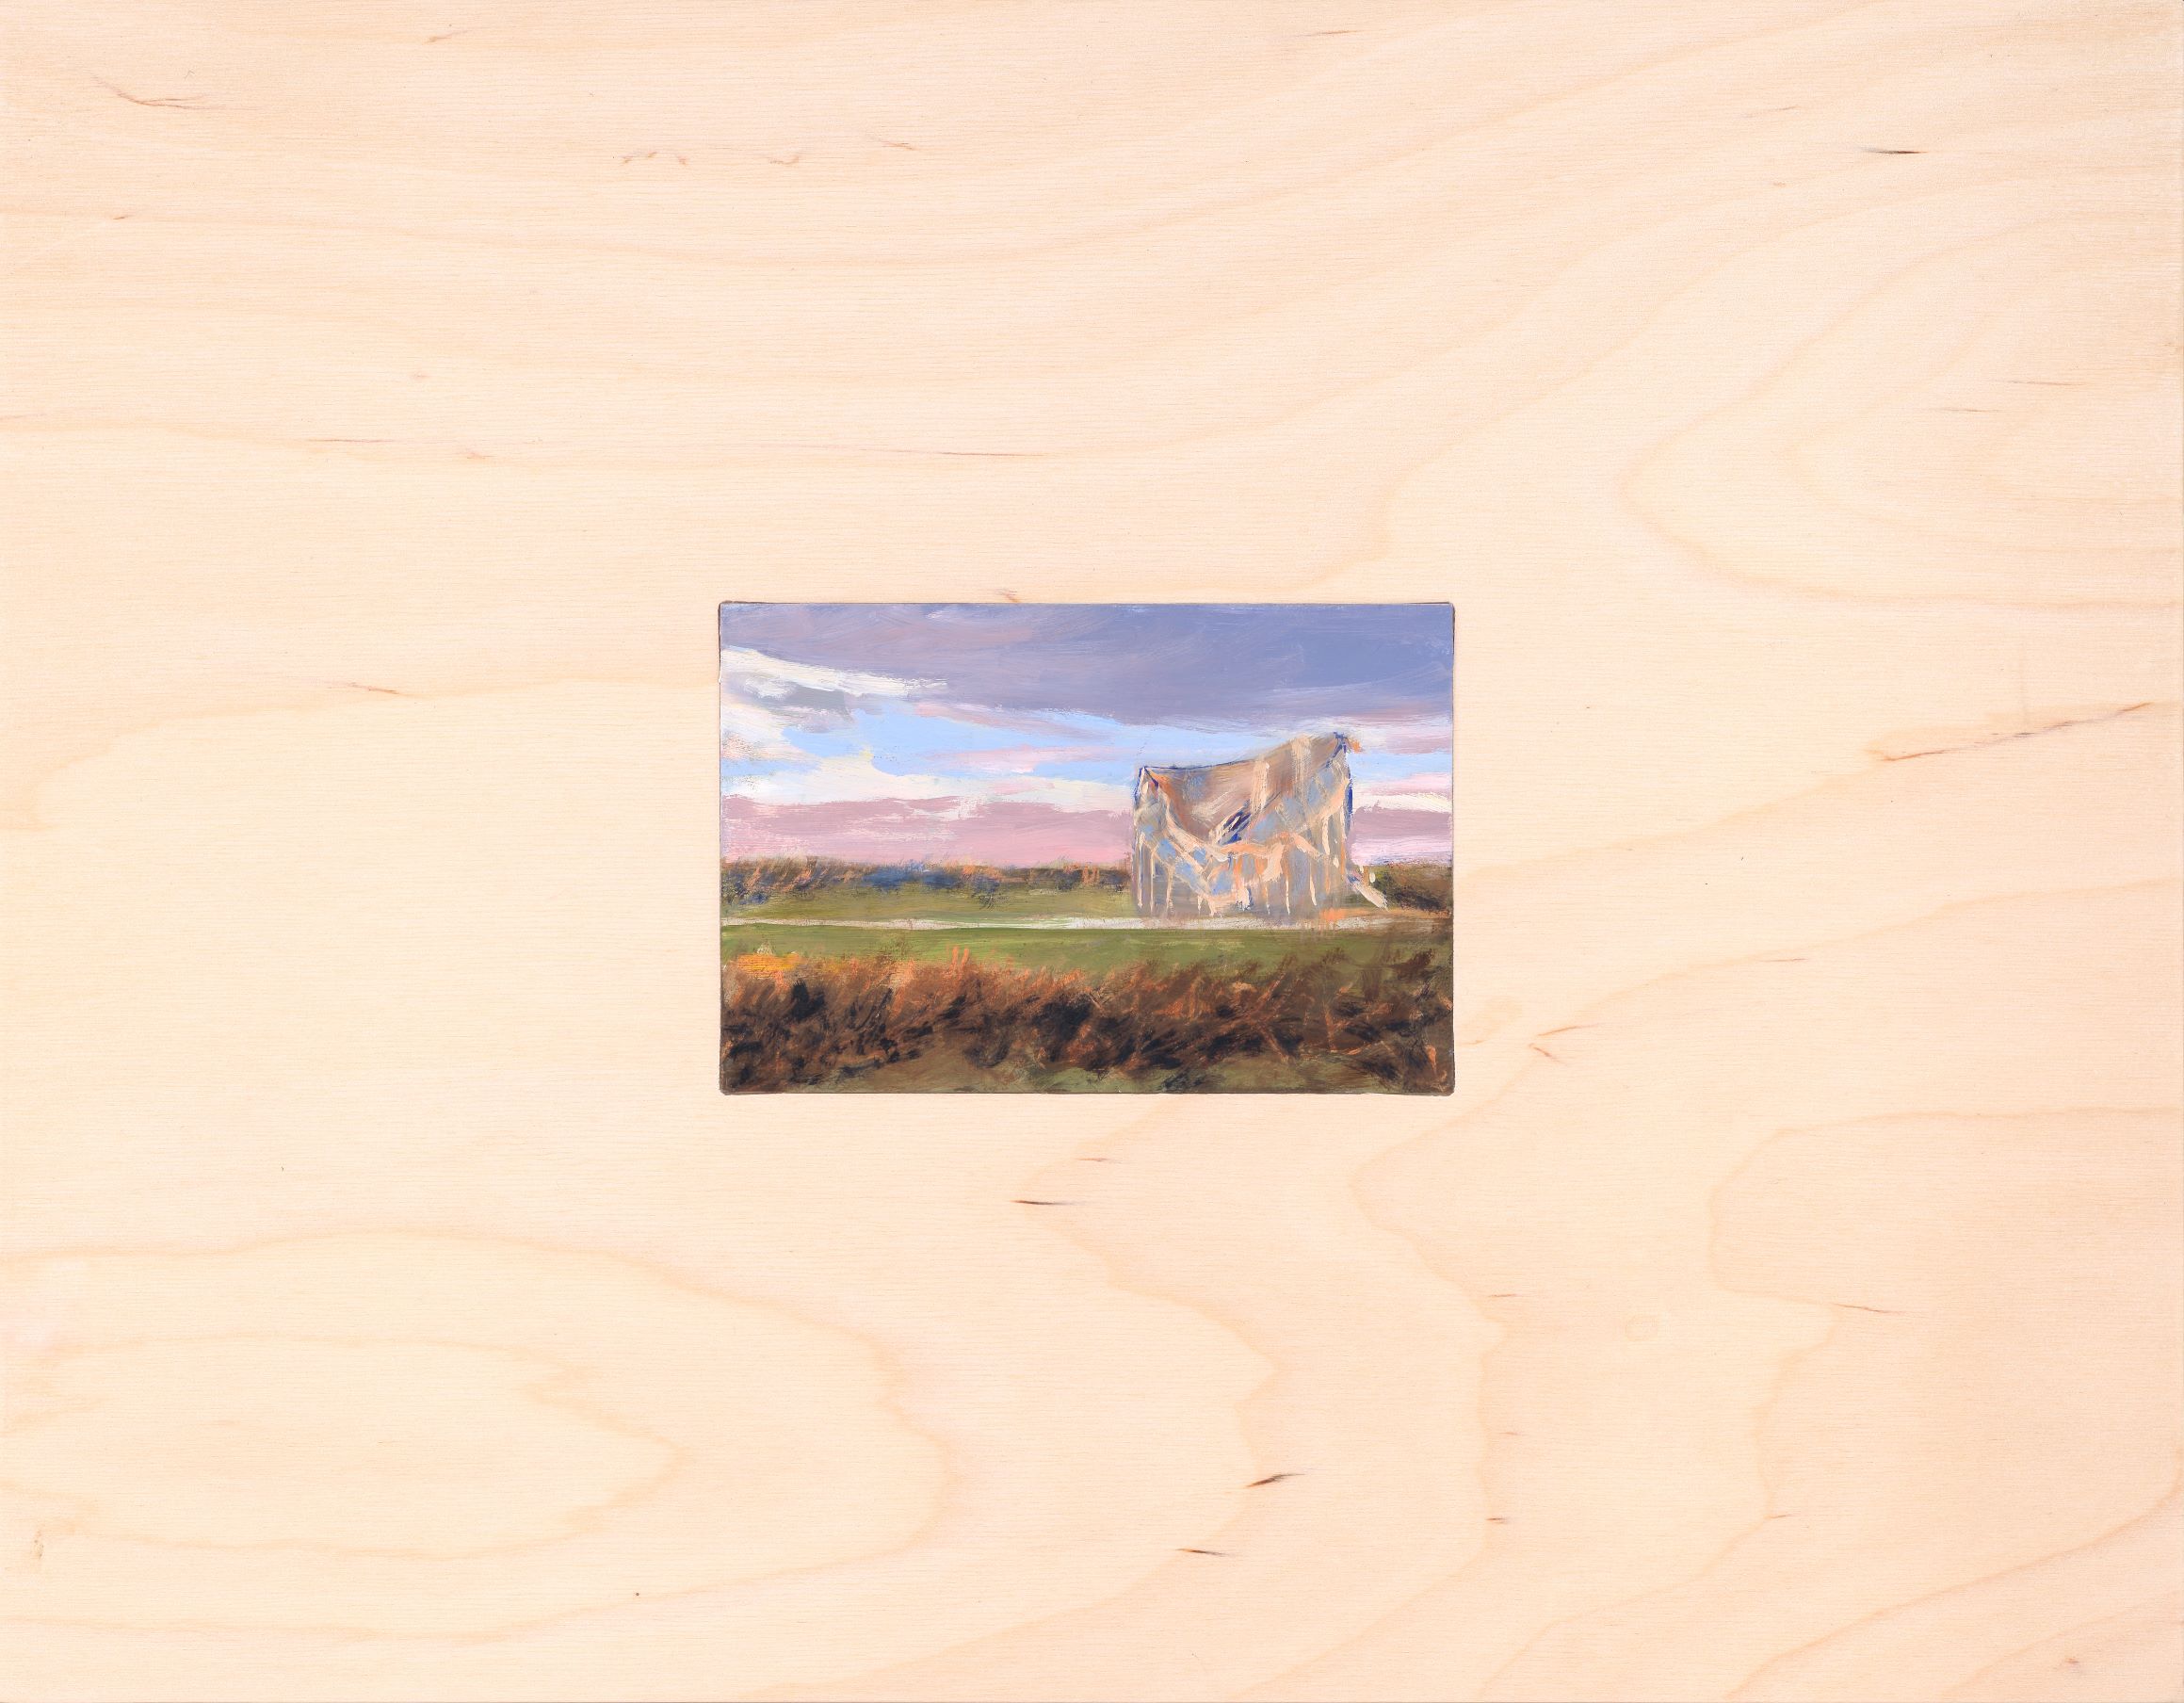 
		                					Don Stinson		                																	
																											<i>Ruined Grain Bin, West of Luther, IA,</i>  
																																								2020-2021, 
																																								Oil on copper inset in birch panel, 
																																								14 x 18 x 1 inches 
																								
		                				